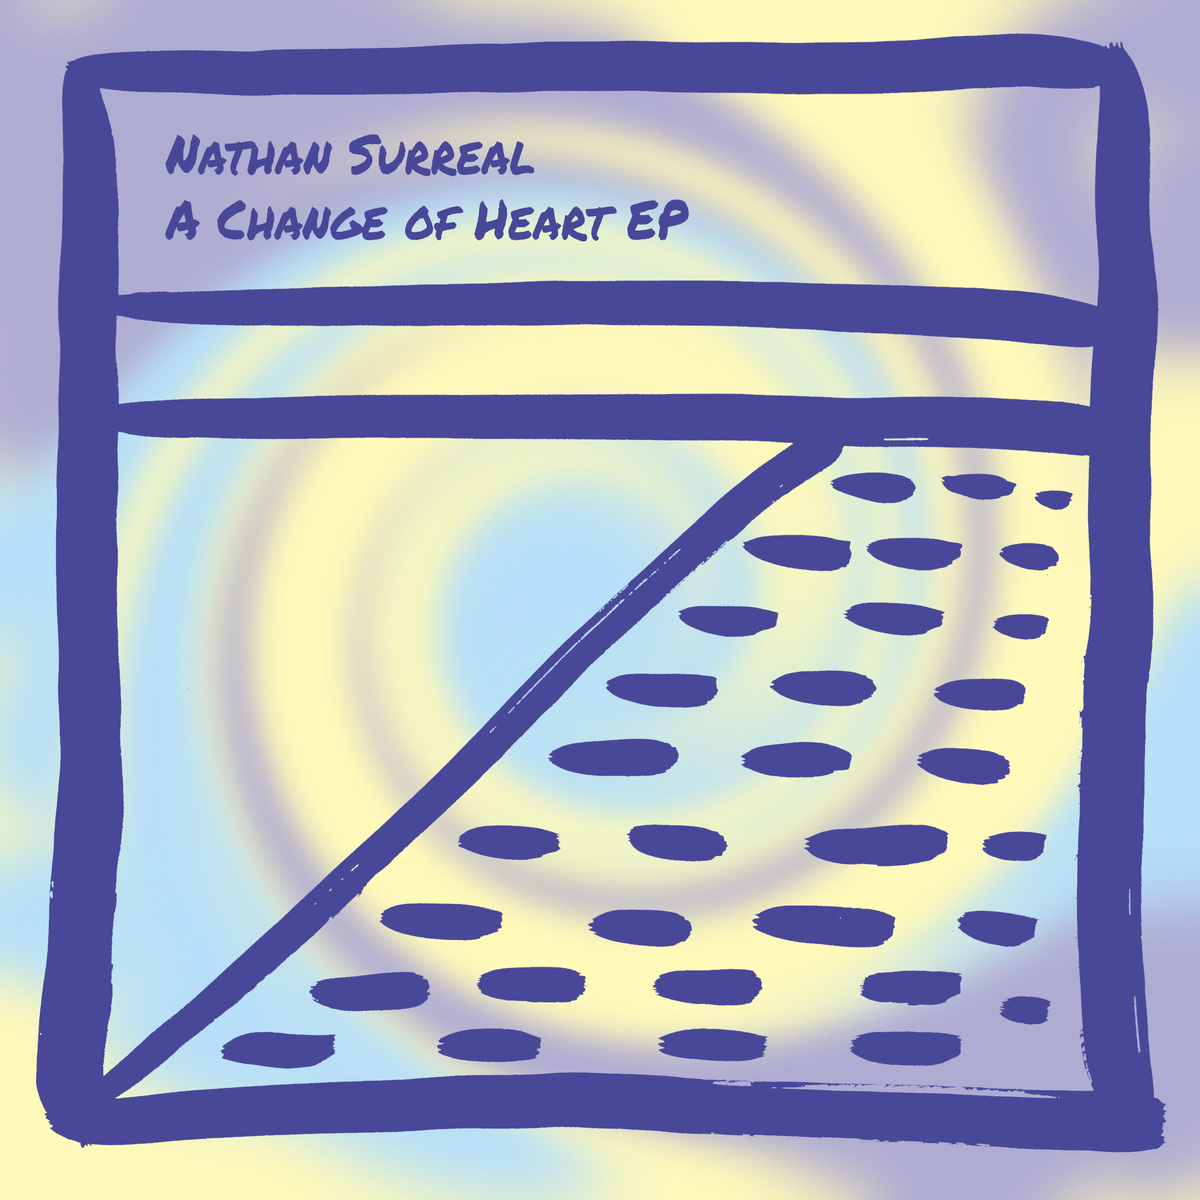 Nathan Surreal - A Change of Heart EP / Biologic records